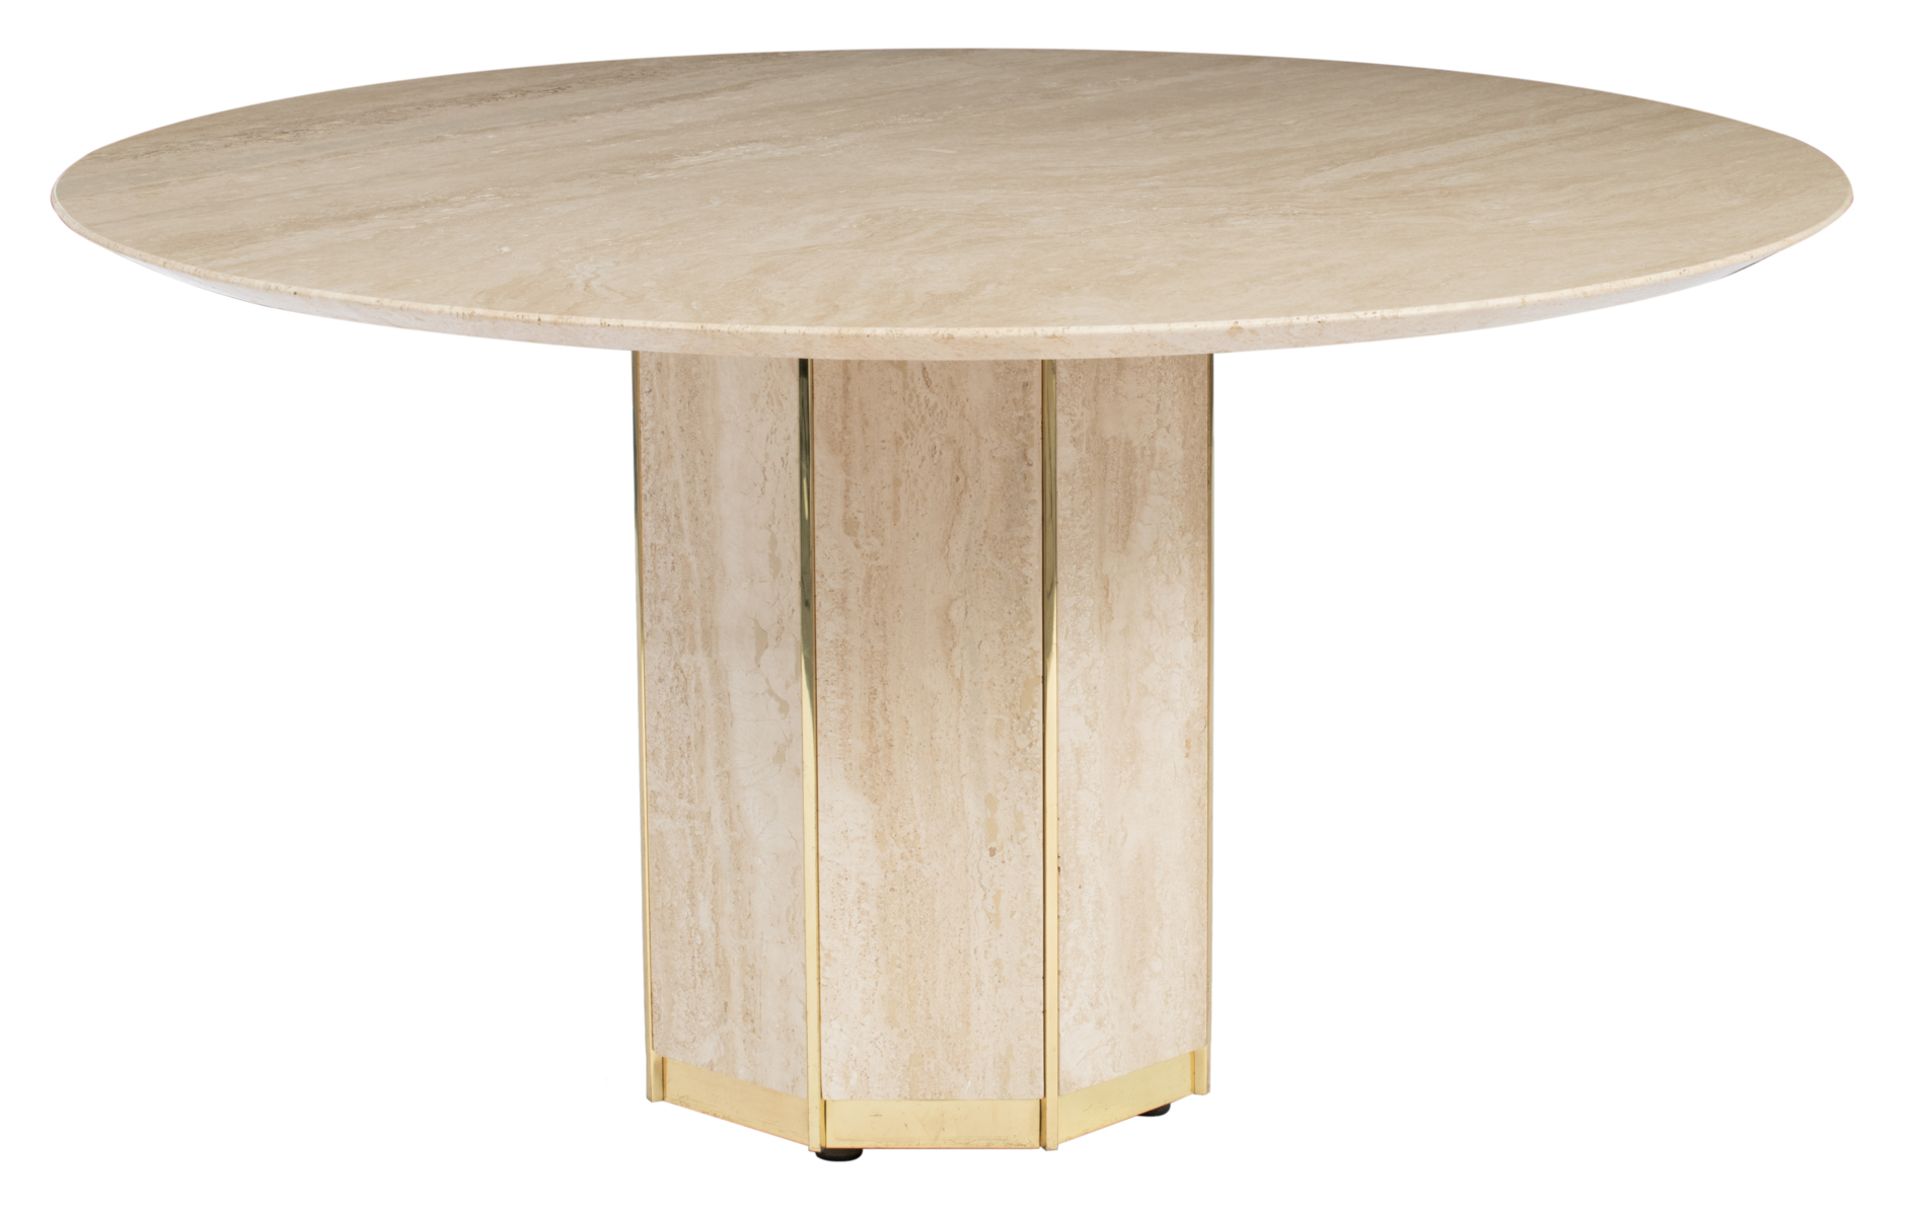 A brass and travertine round dining table, in the manner of Belgo Chrom, H 73 - ø 135,5 cm